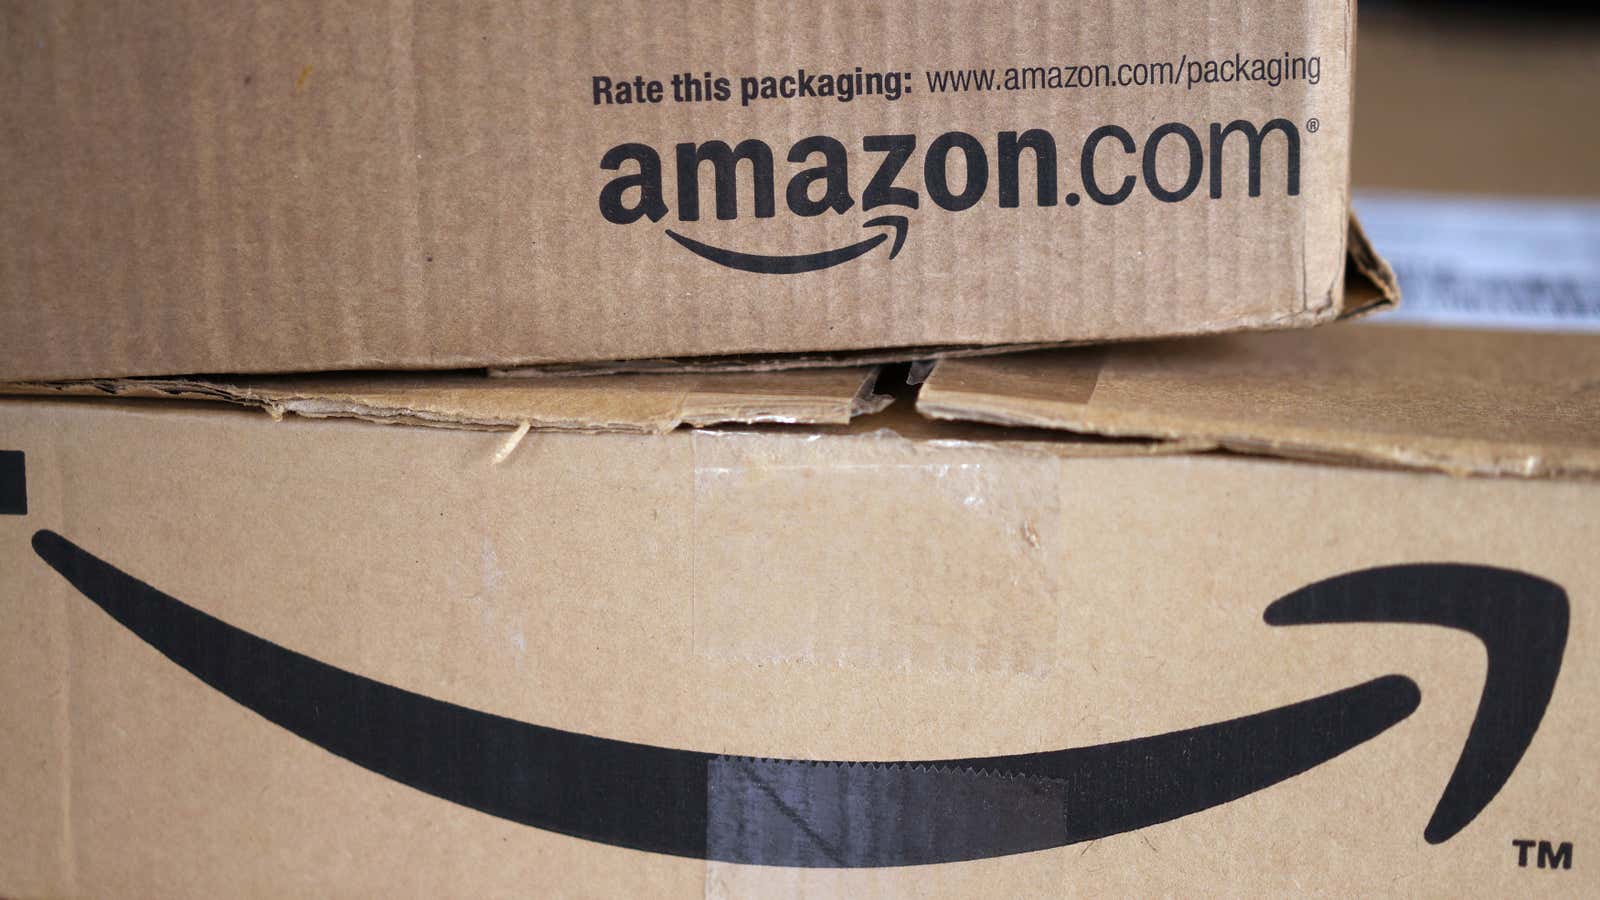 These boxes are already being filled with clothes Amazon quietly designed.